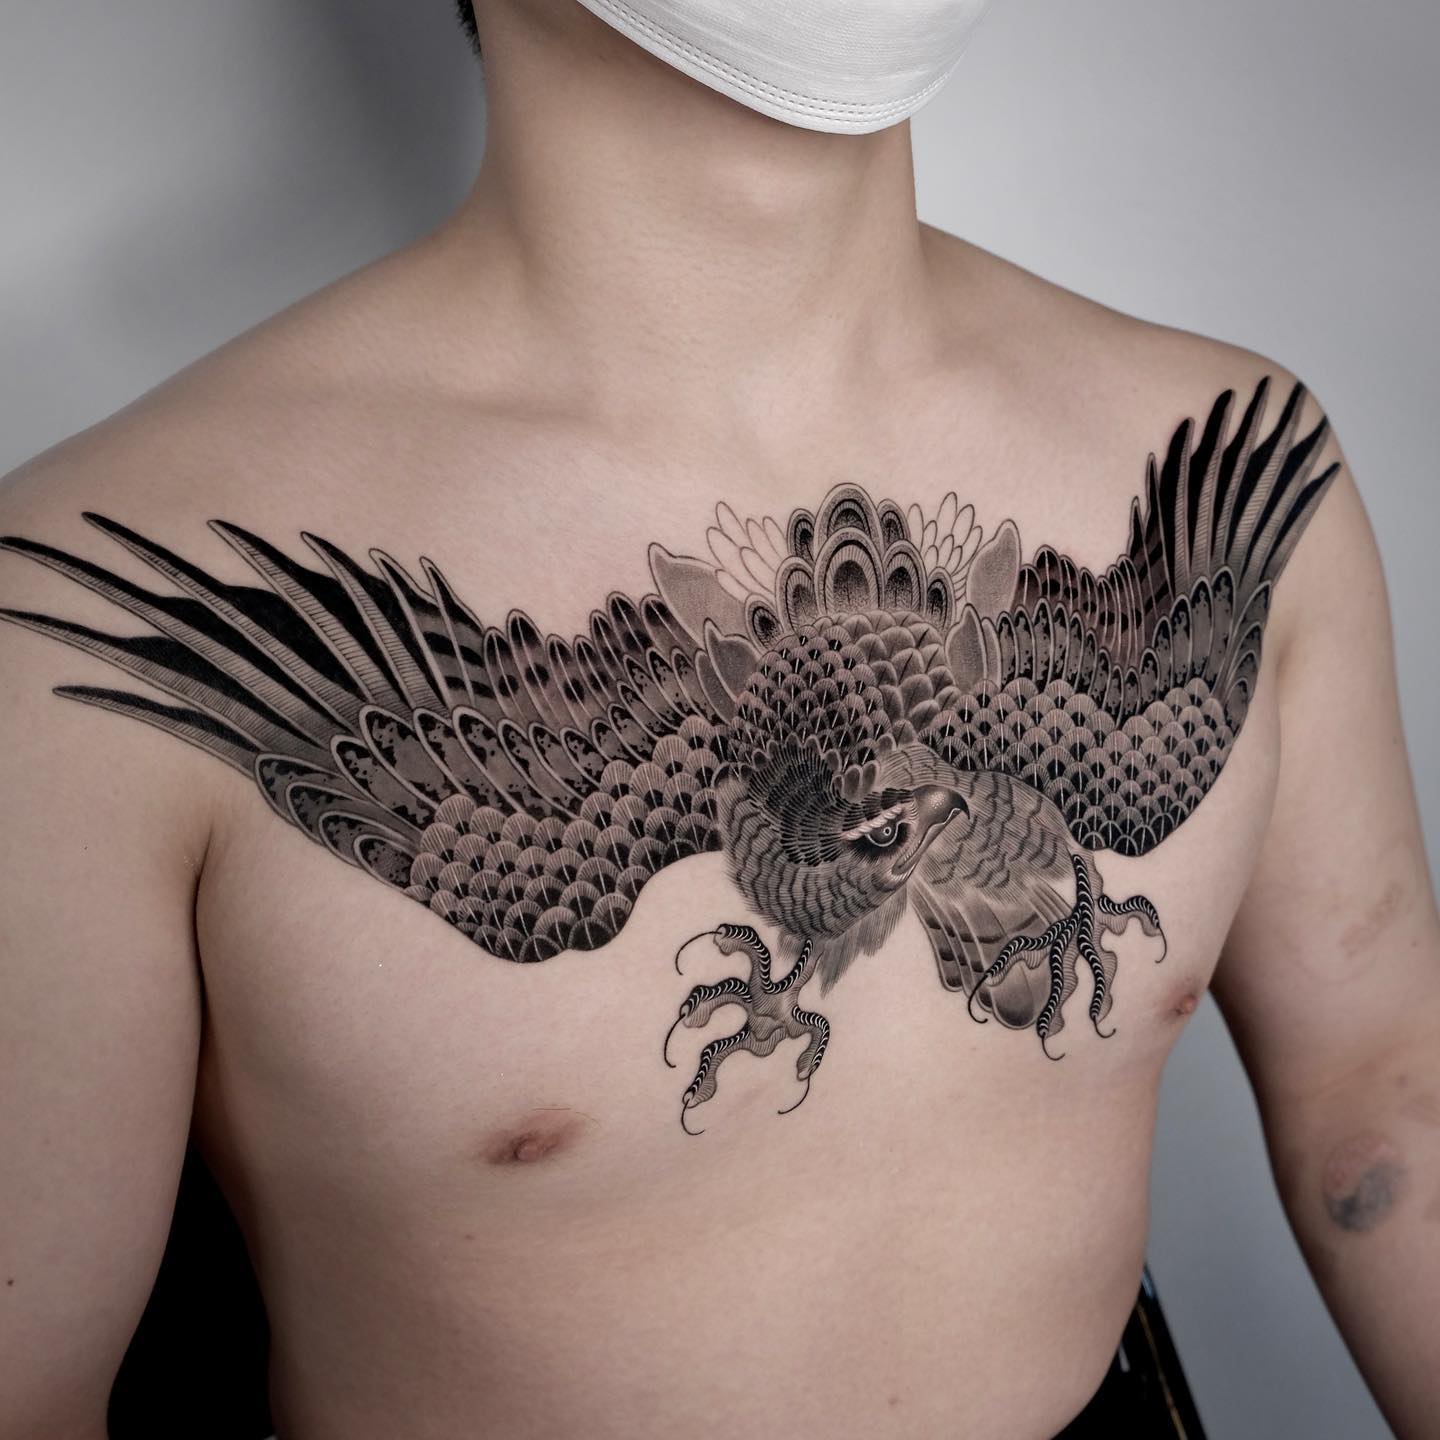 Eagle tattoo on chest by dokgonoing 1